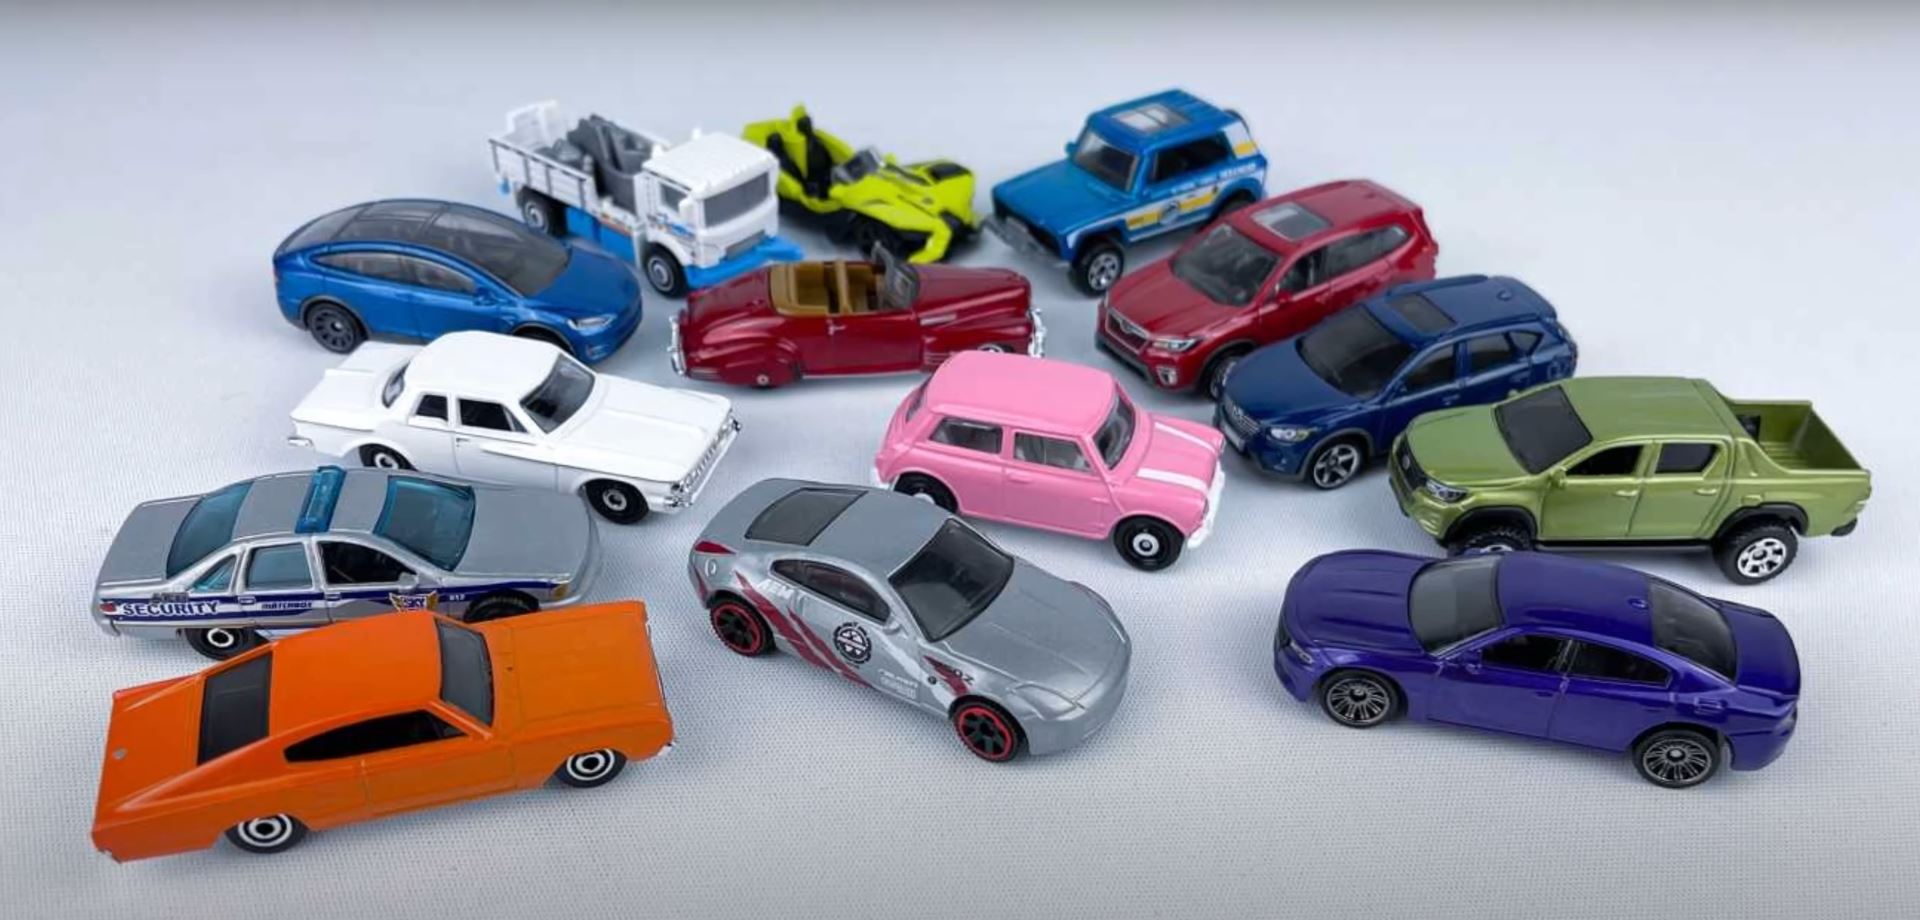 2022 Matchbox Case D Unboxing Reveals 24 Scale Cars to Bring Joy to